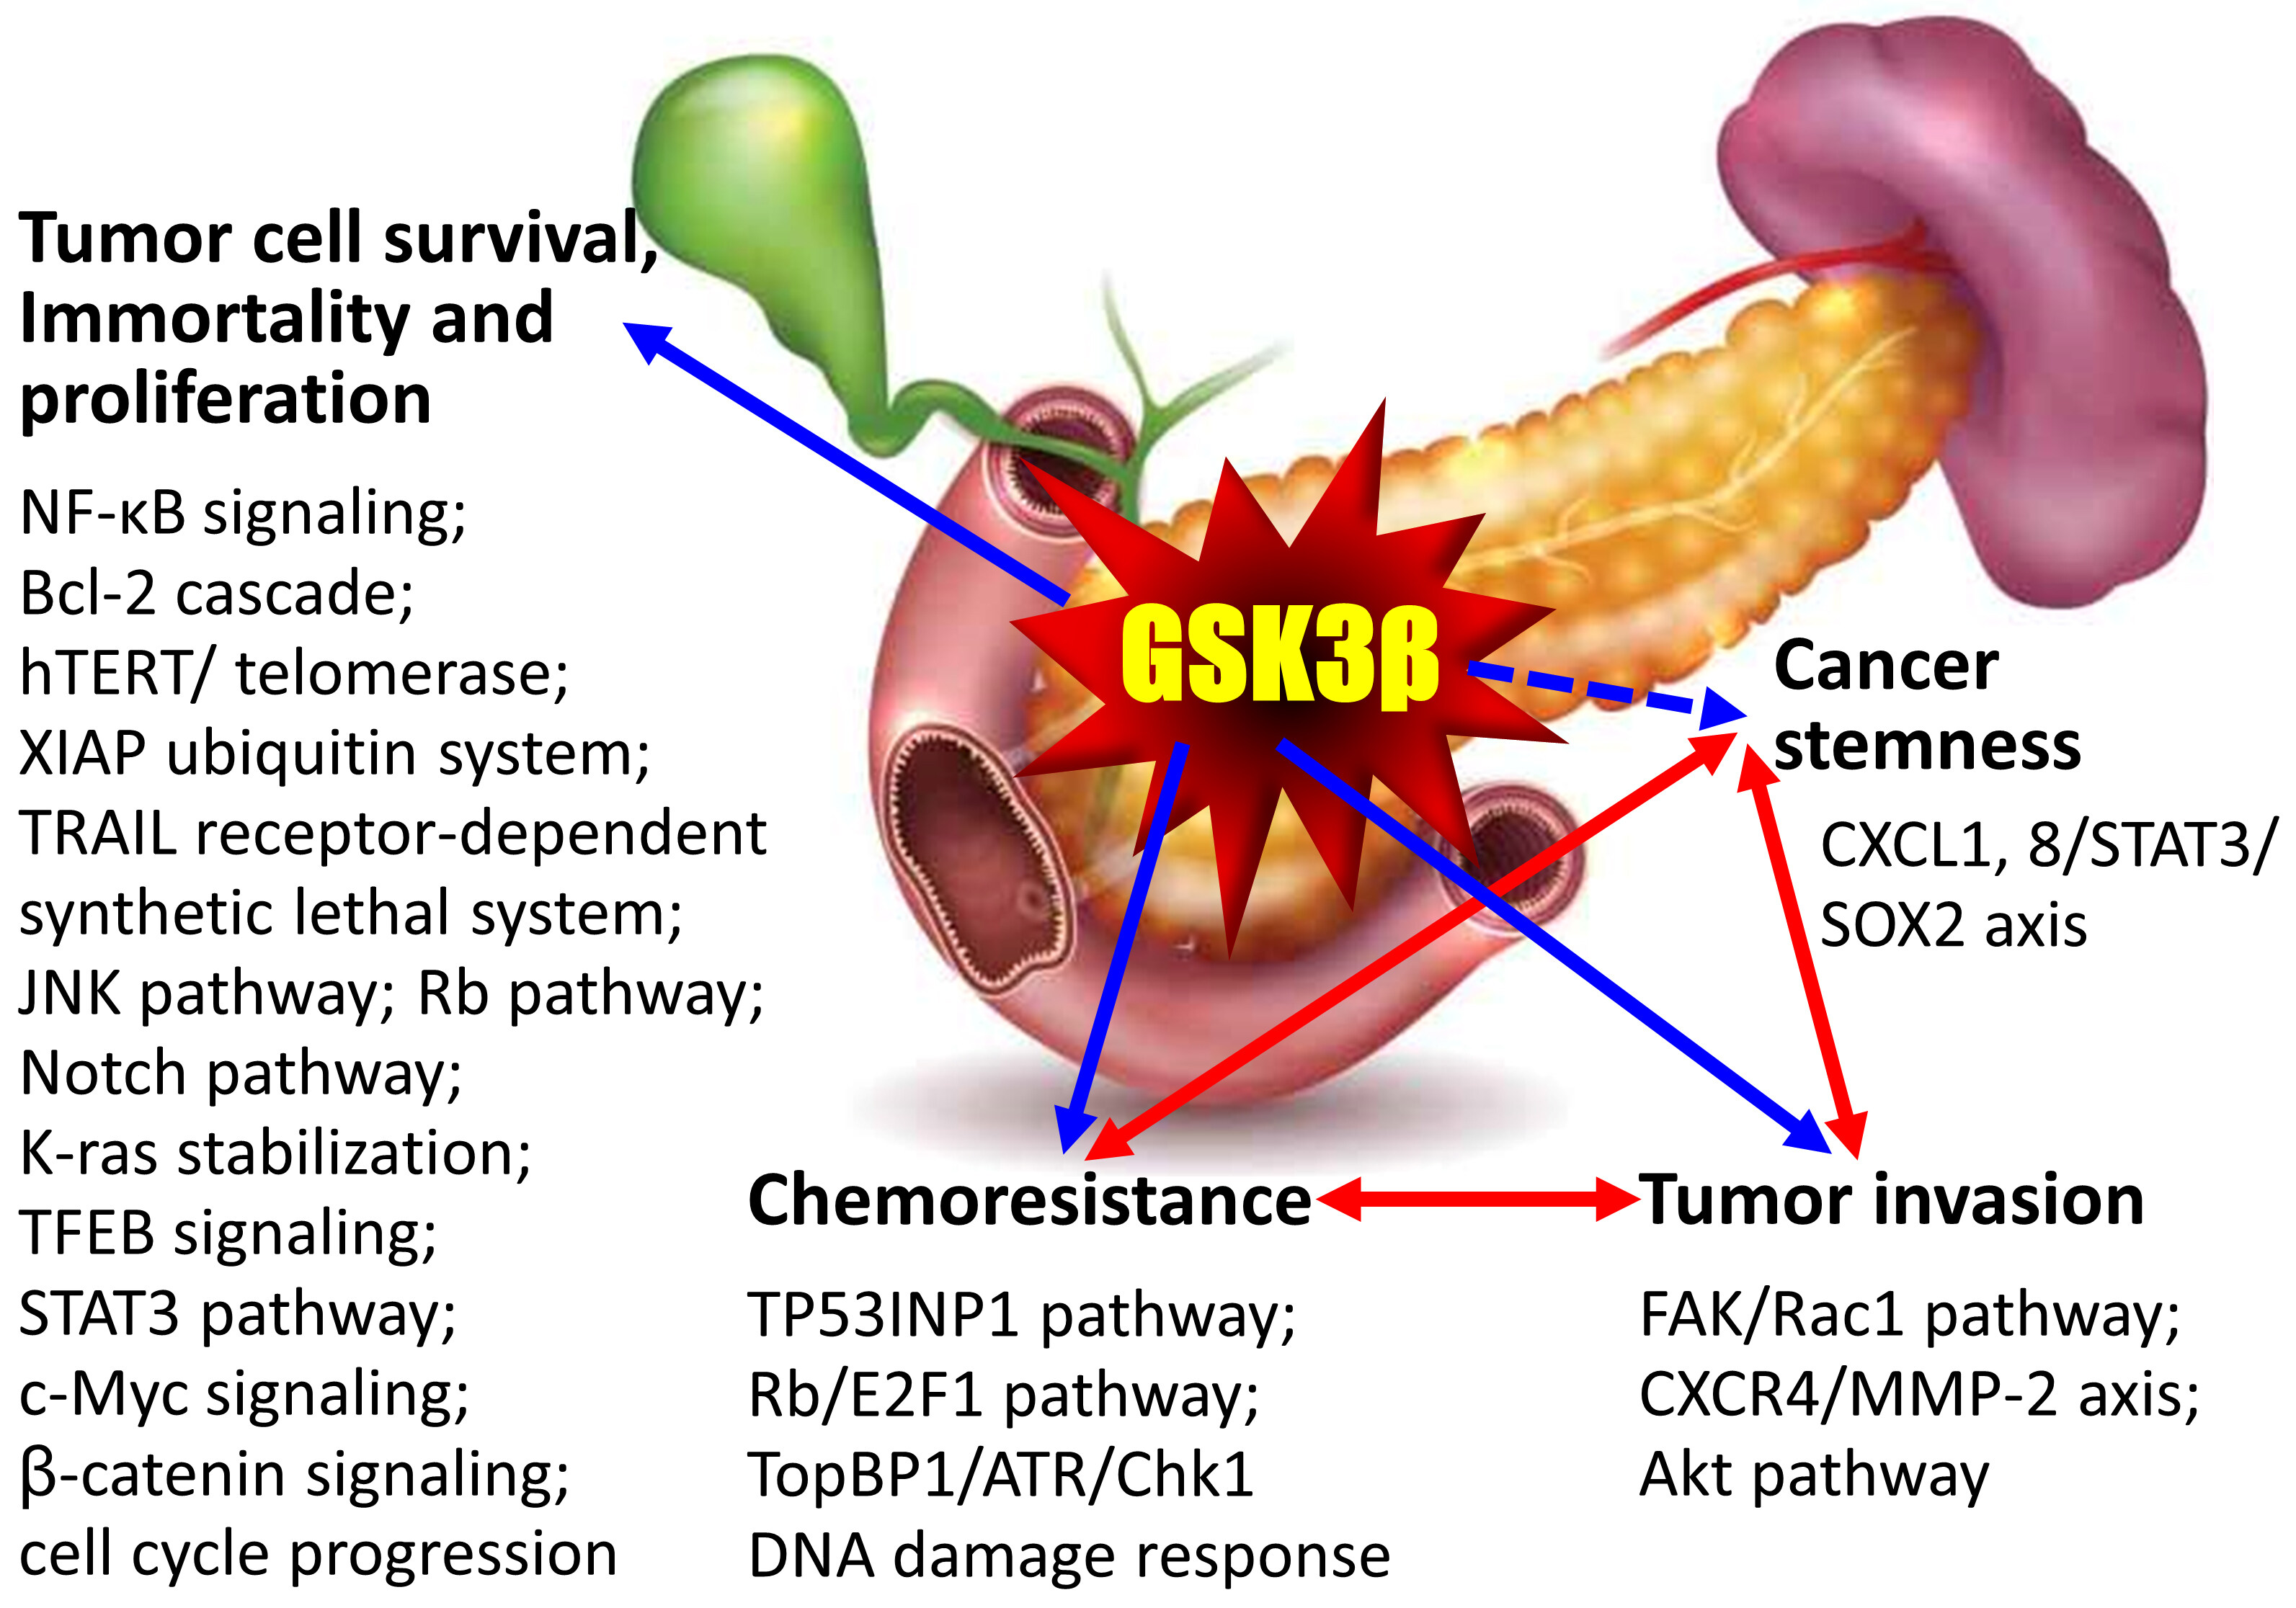 Glycogen synthase kinase 3β: the nexus of chemoresistance, invasive capacity, and cancer stemness in pancreatic cancer